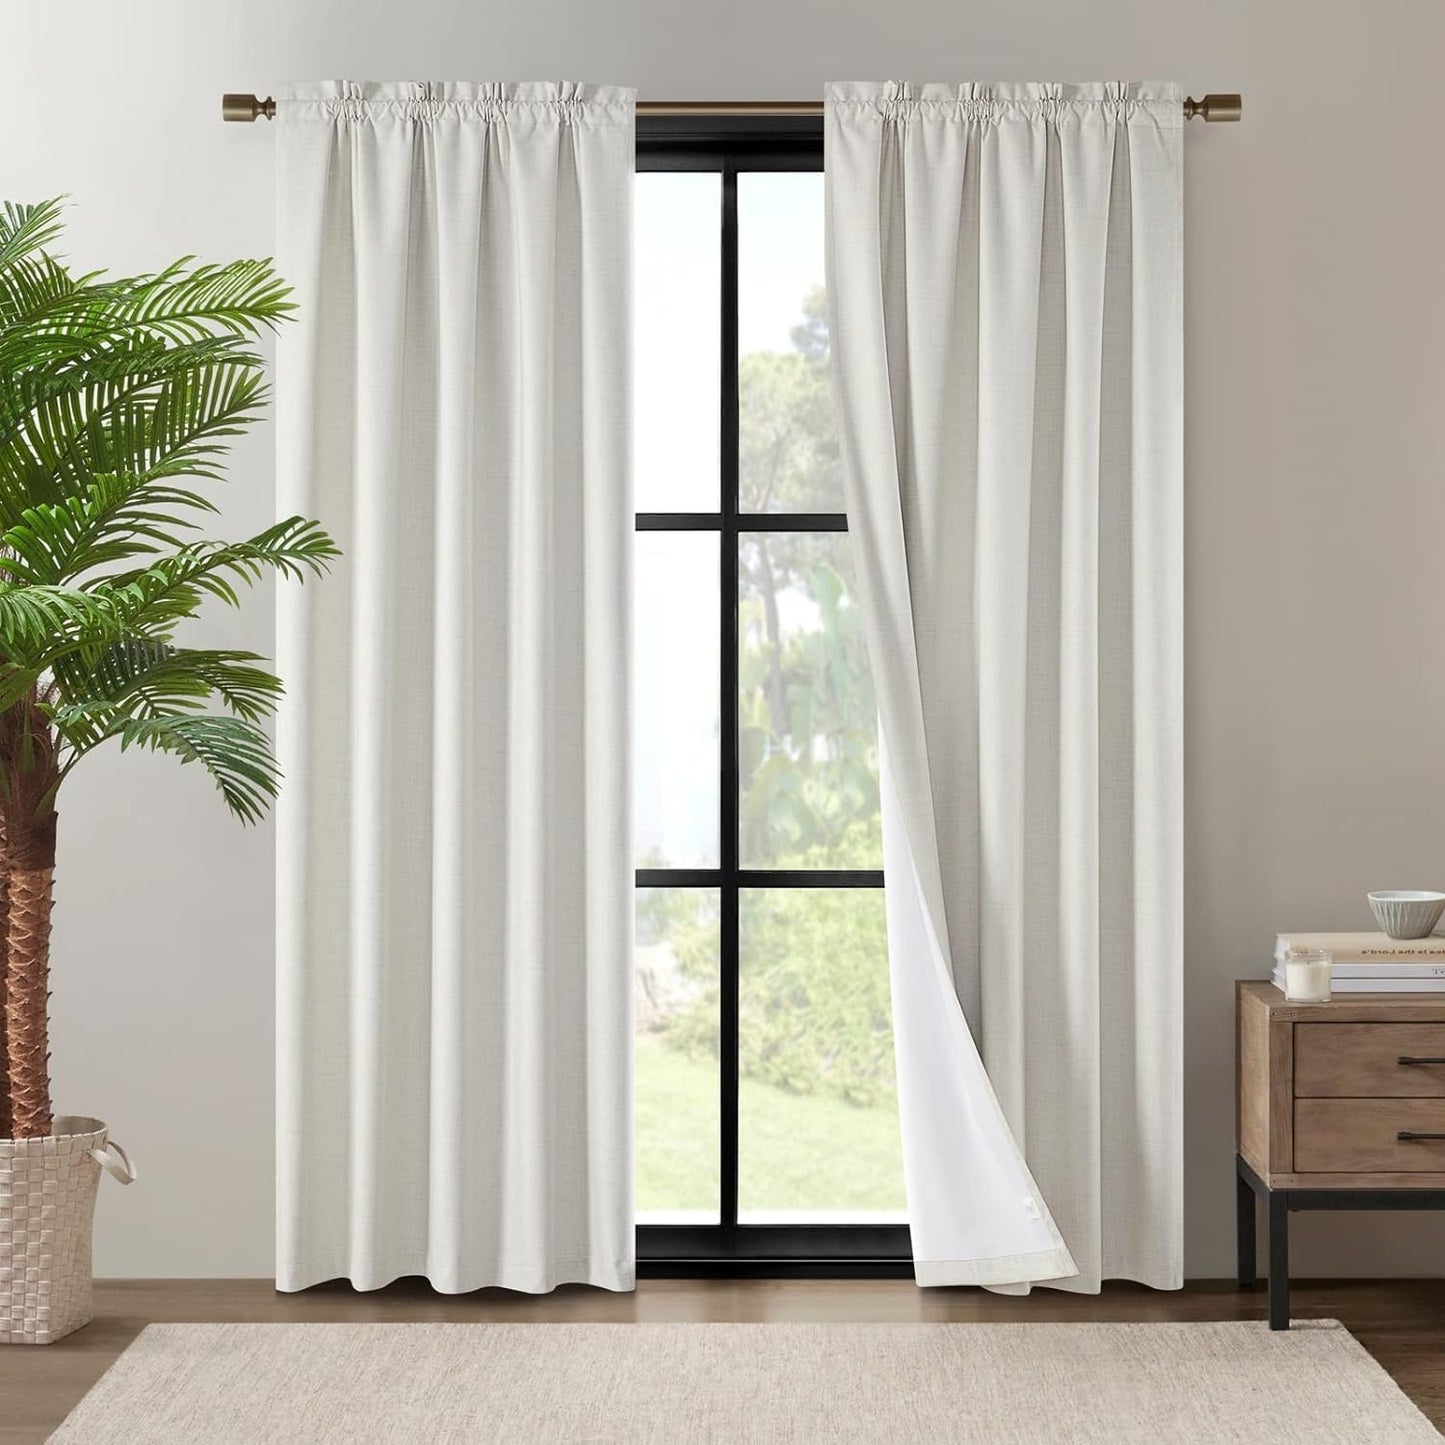 Dreaming Casa Linen Blackout Curtains for Beadroom 2 Panels 96 Inch Long Living Room Drapes Boho Rustic 100% Black Out Natural Window Curtain with Rod Pocket, 52" W X 96" L  Dreaming Casa Beige, Rod Pocket 2 X (72"W X 84"L) 